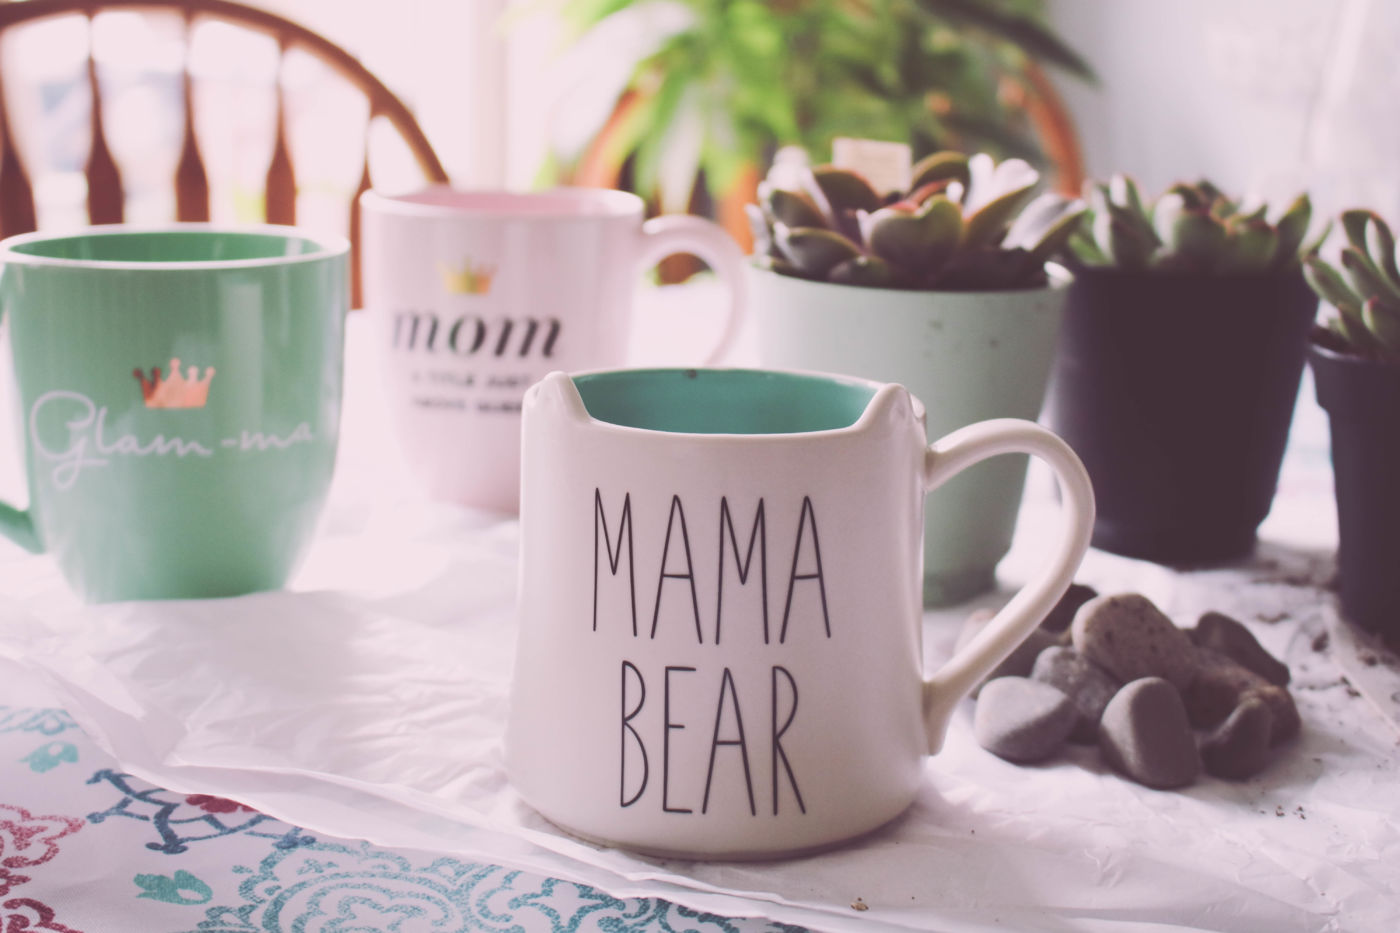 mother's day gift, mother's day gift idea, mother's day diy, how to make a mother's day present, what should i get my mom, mother's day gift guide, how to repot succulents, succulent planters, diy succulent planter, succulents in mugs, diy gift ideas, cute diy gift, cheap gift idea, DIY succulent planters